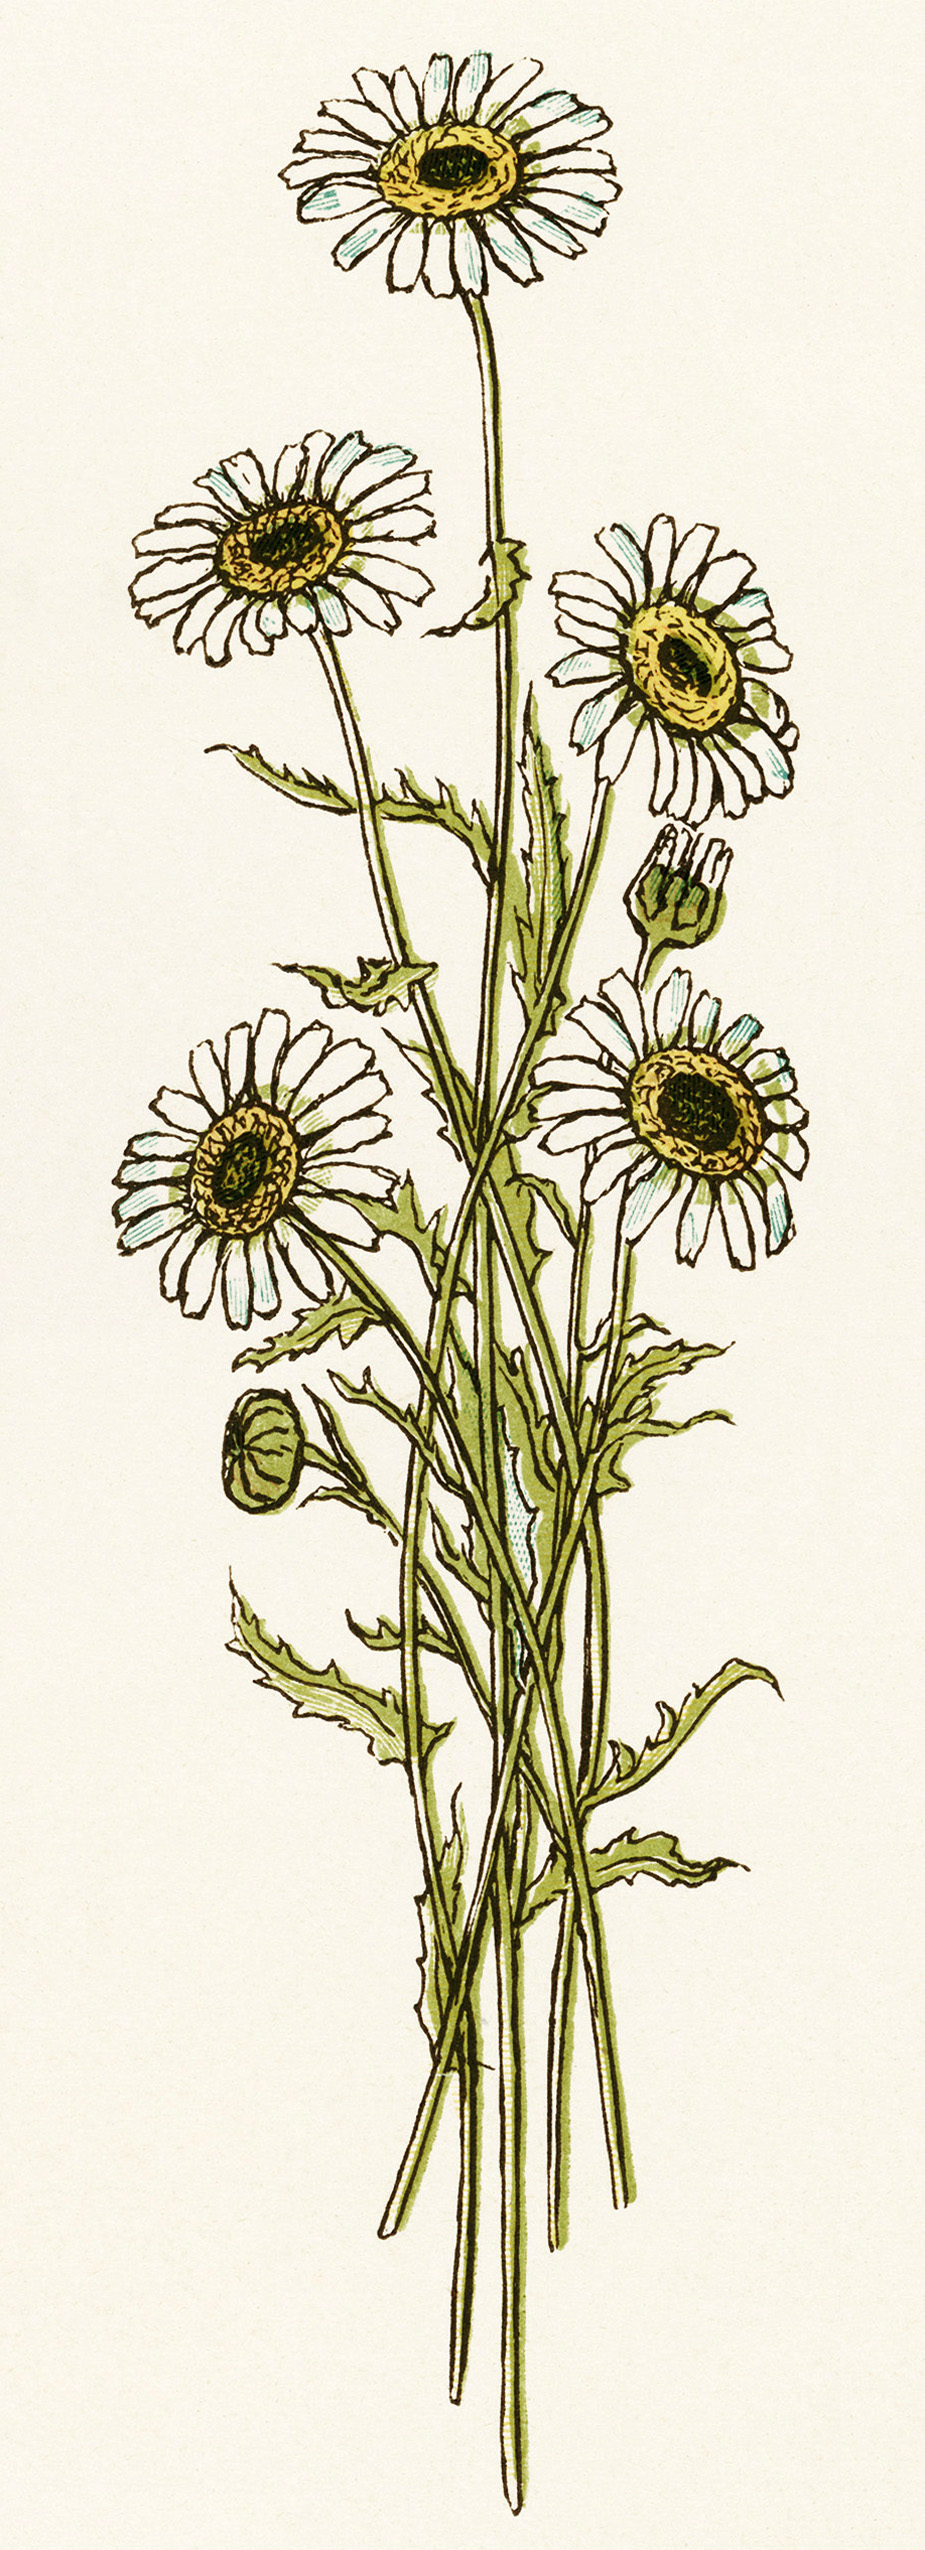 Kate Greenaway Bouquet Of Daisies   Free Vintage Image   Old Design    